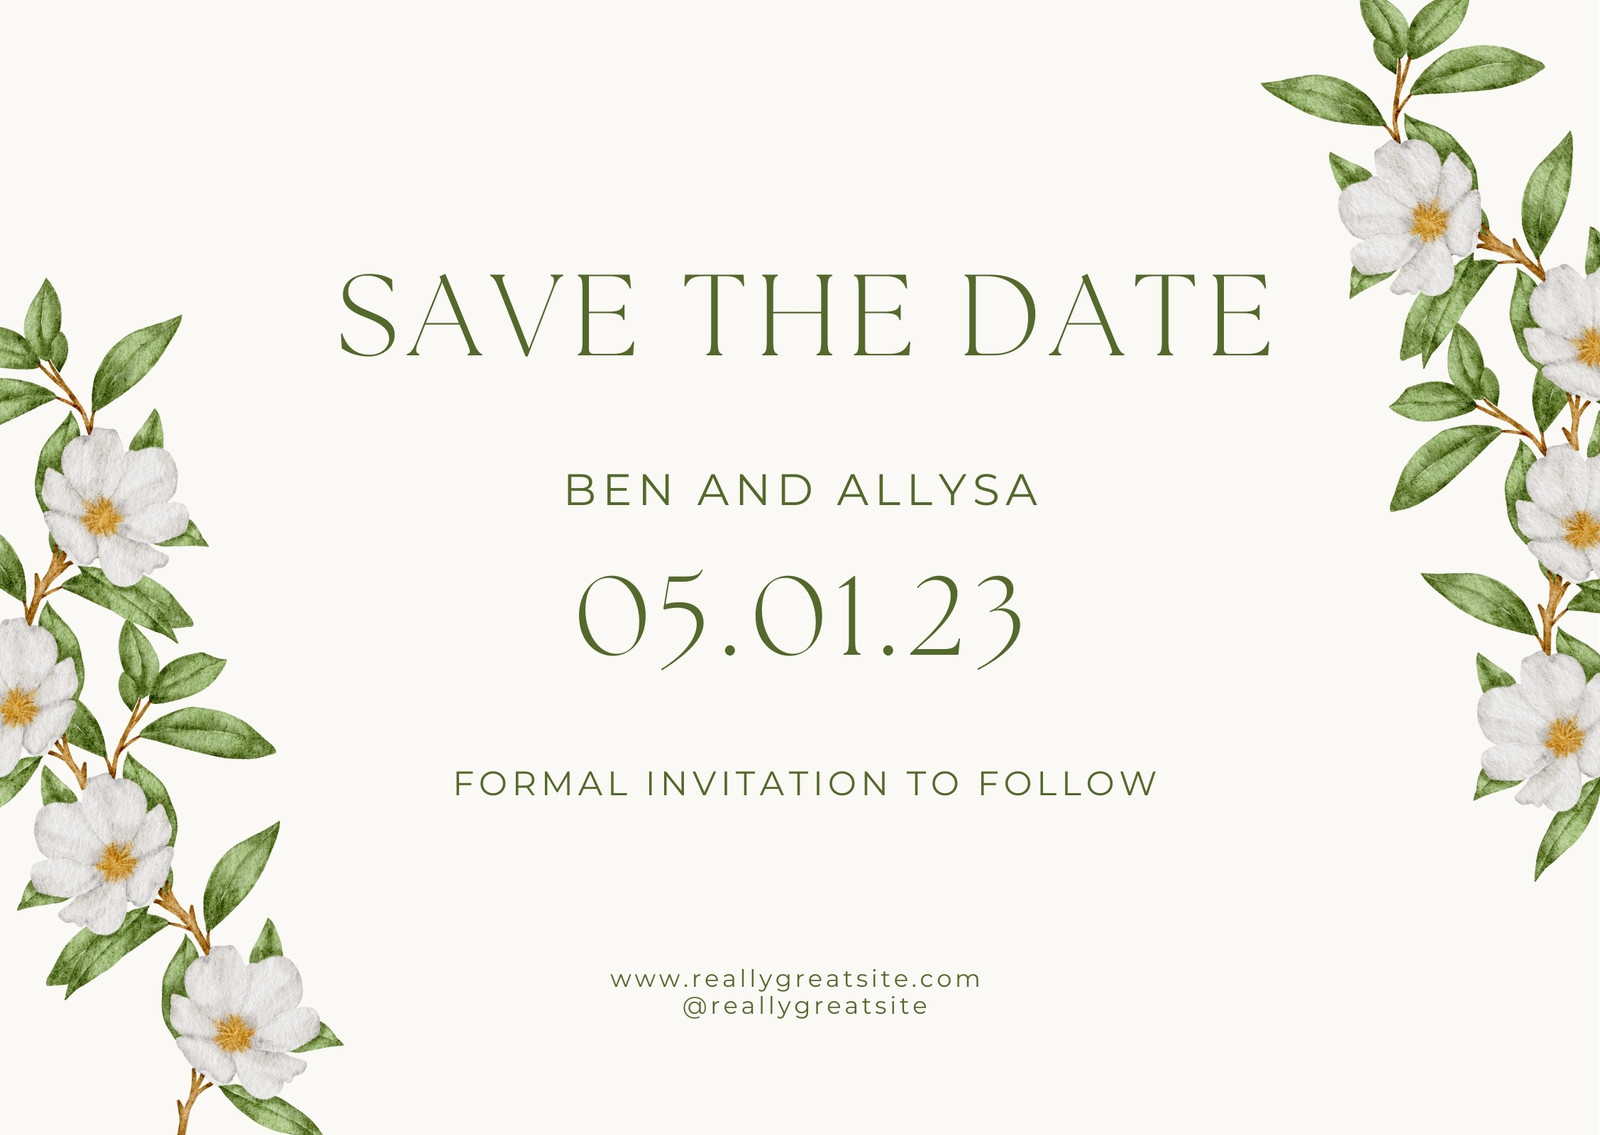 Simple Save the Date Card, Save the Date Postcard, Modern Save the Date,  Personalised Save the Dates, Wedding Save the Dates, Rustic, 081 